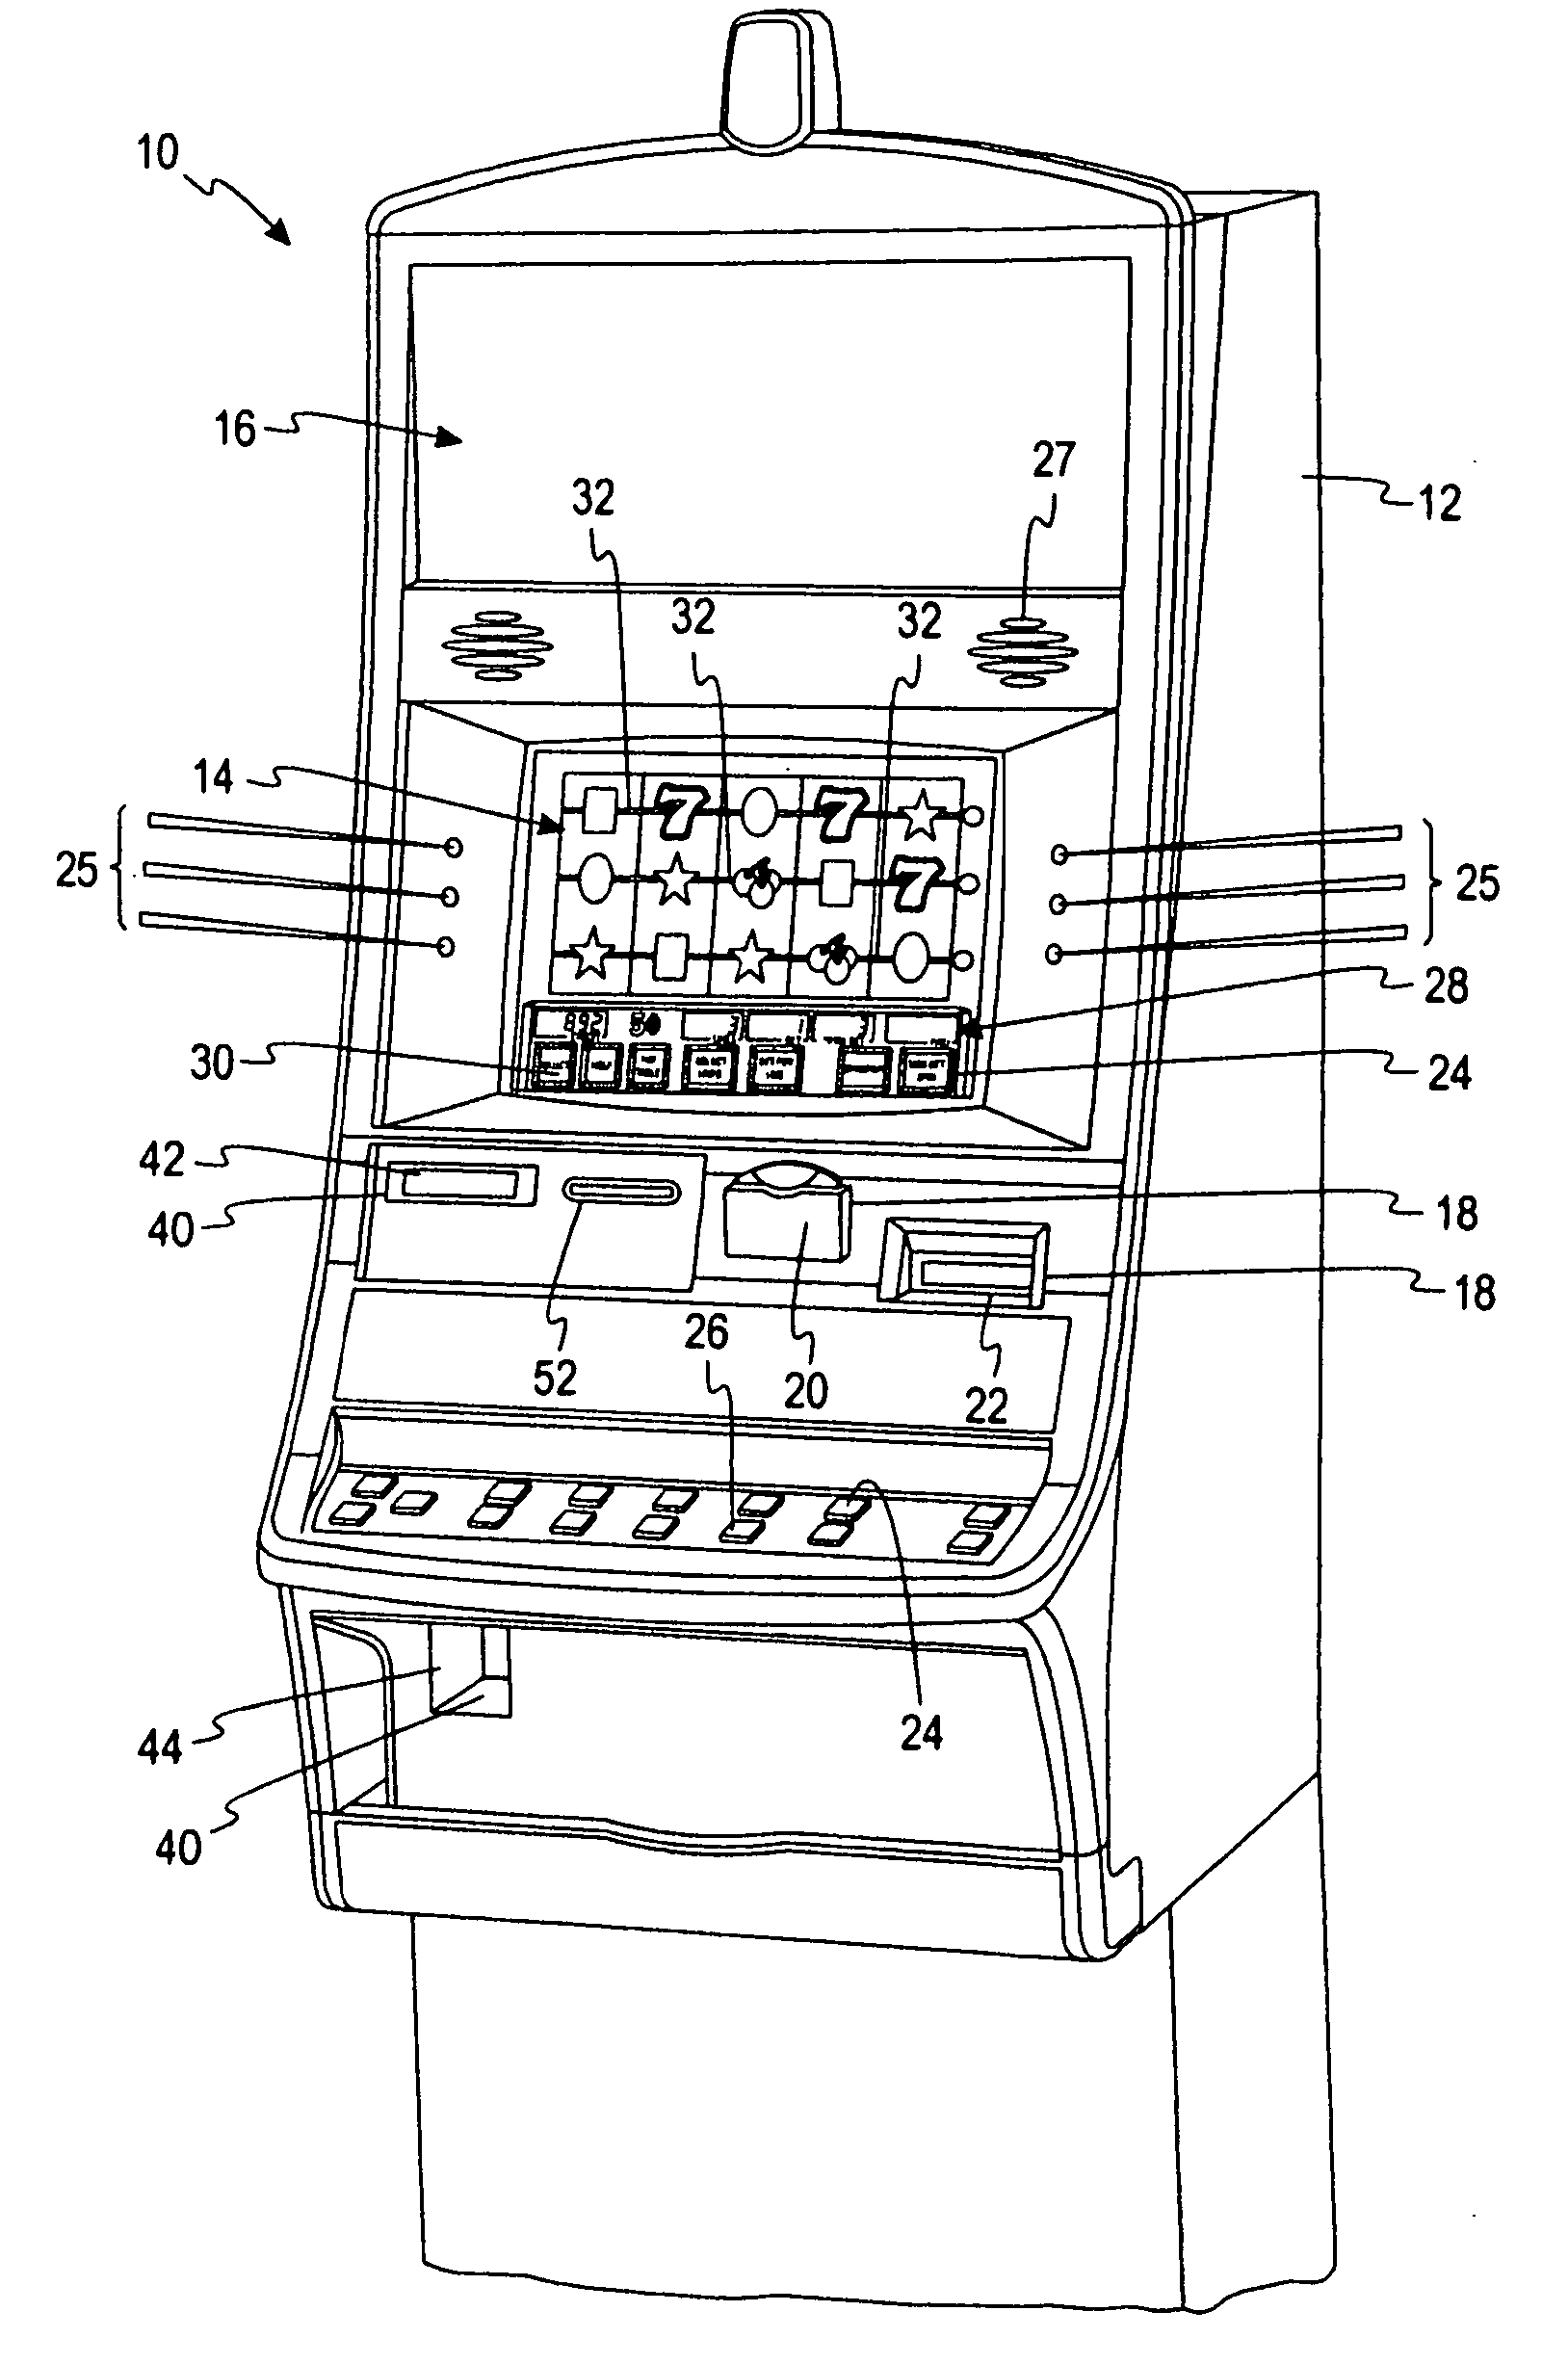 Multi-player, multi-touch table for use in wagering game systems